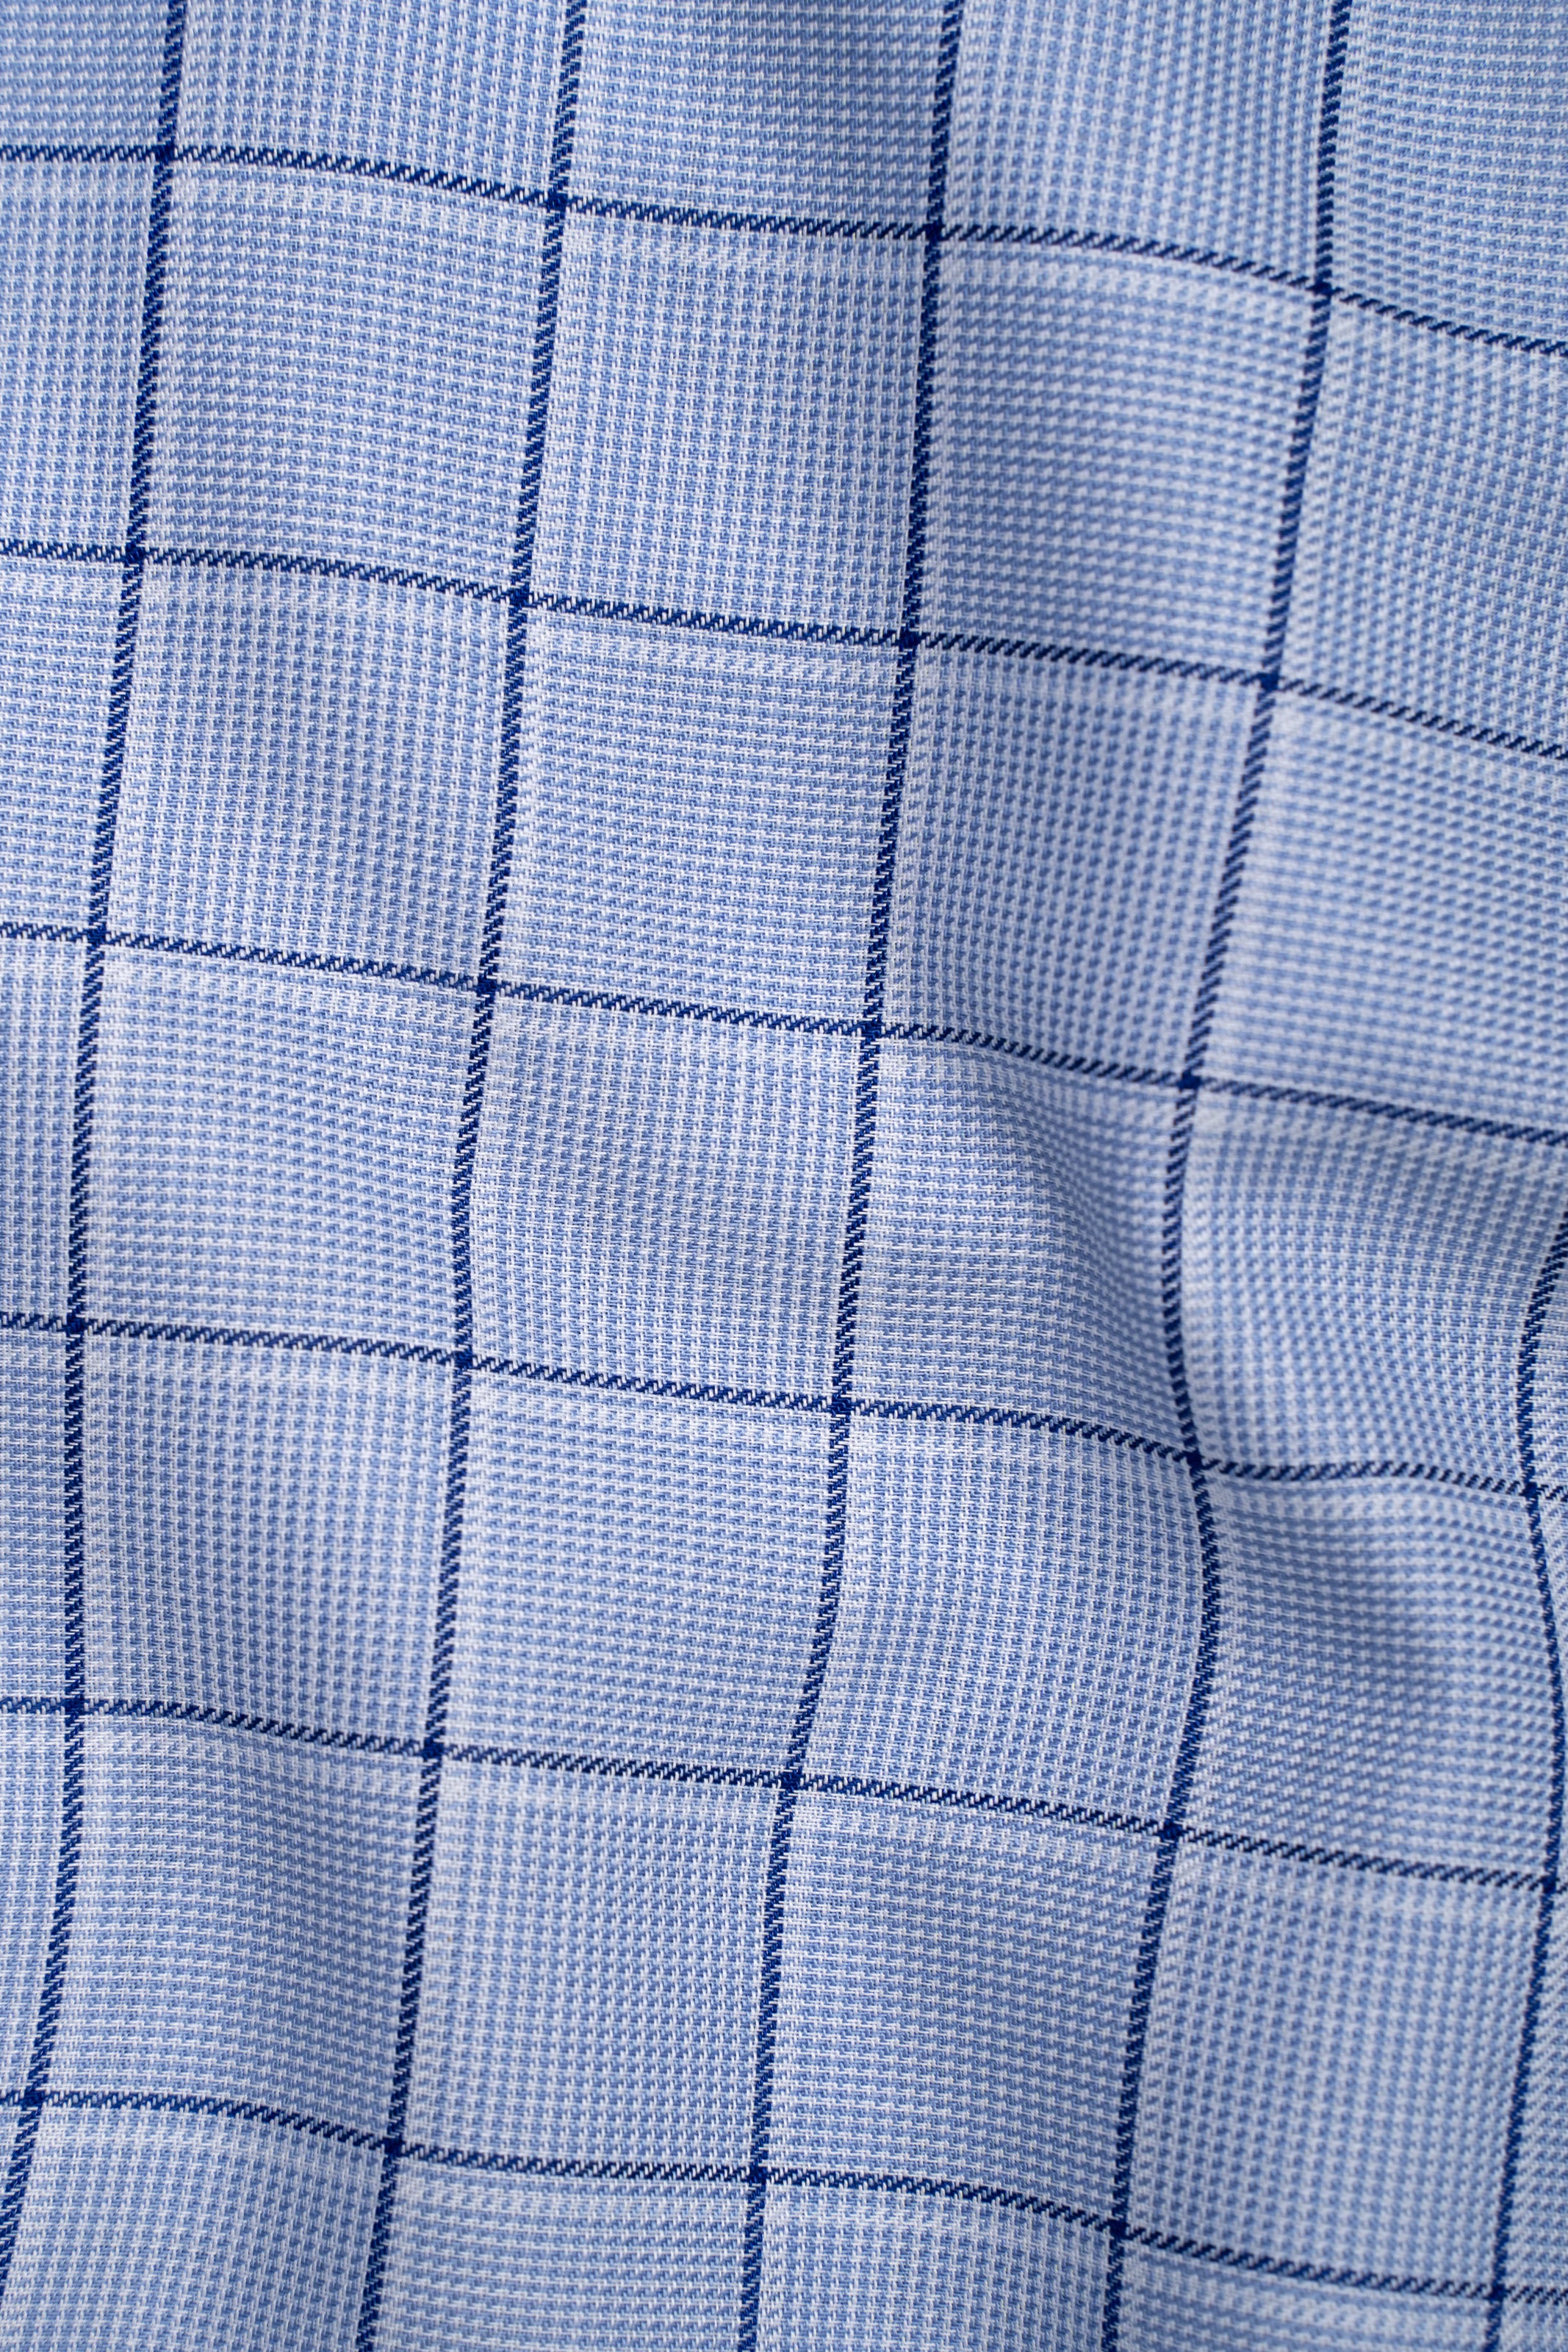 LIMITED EDITION SHIRTS SKY BLUE CHECK